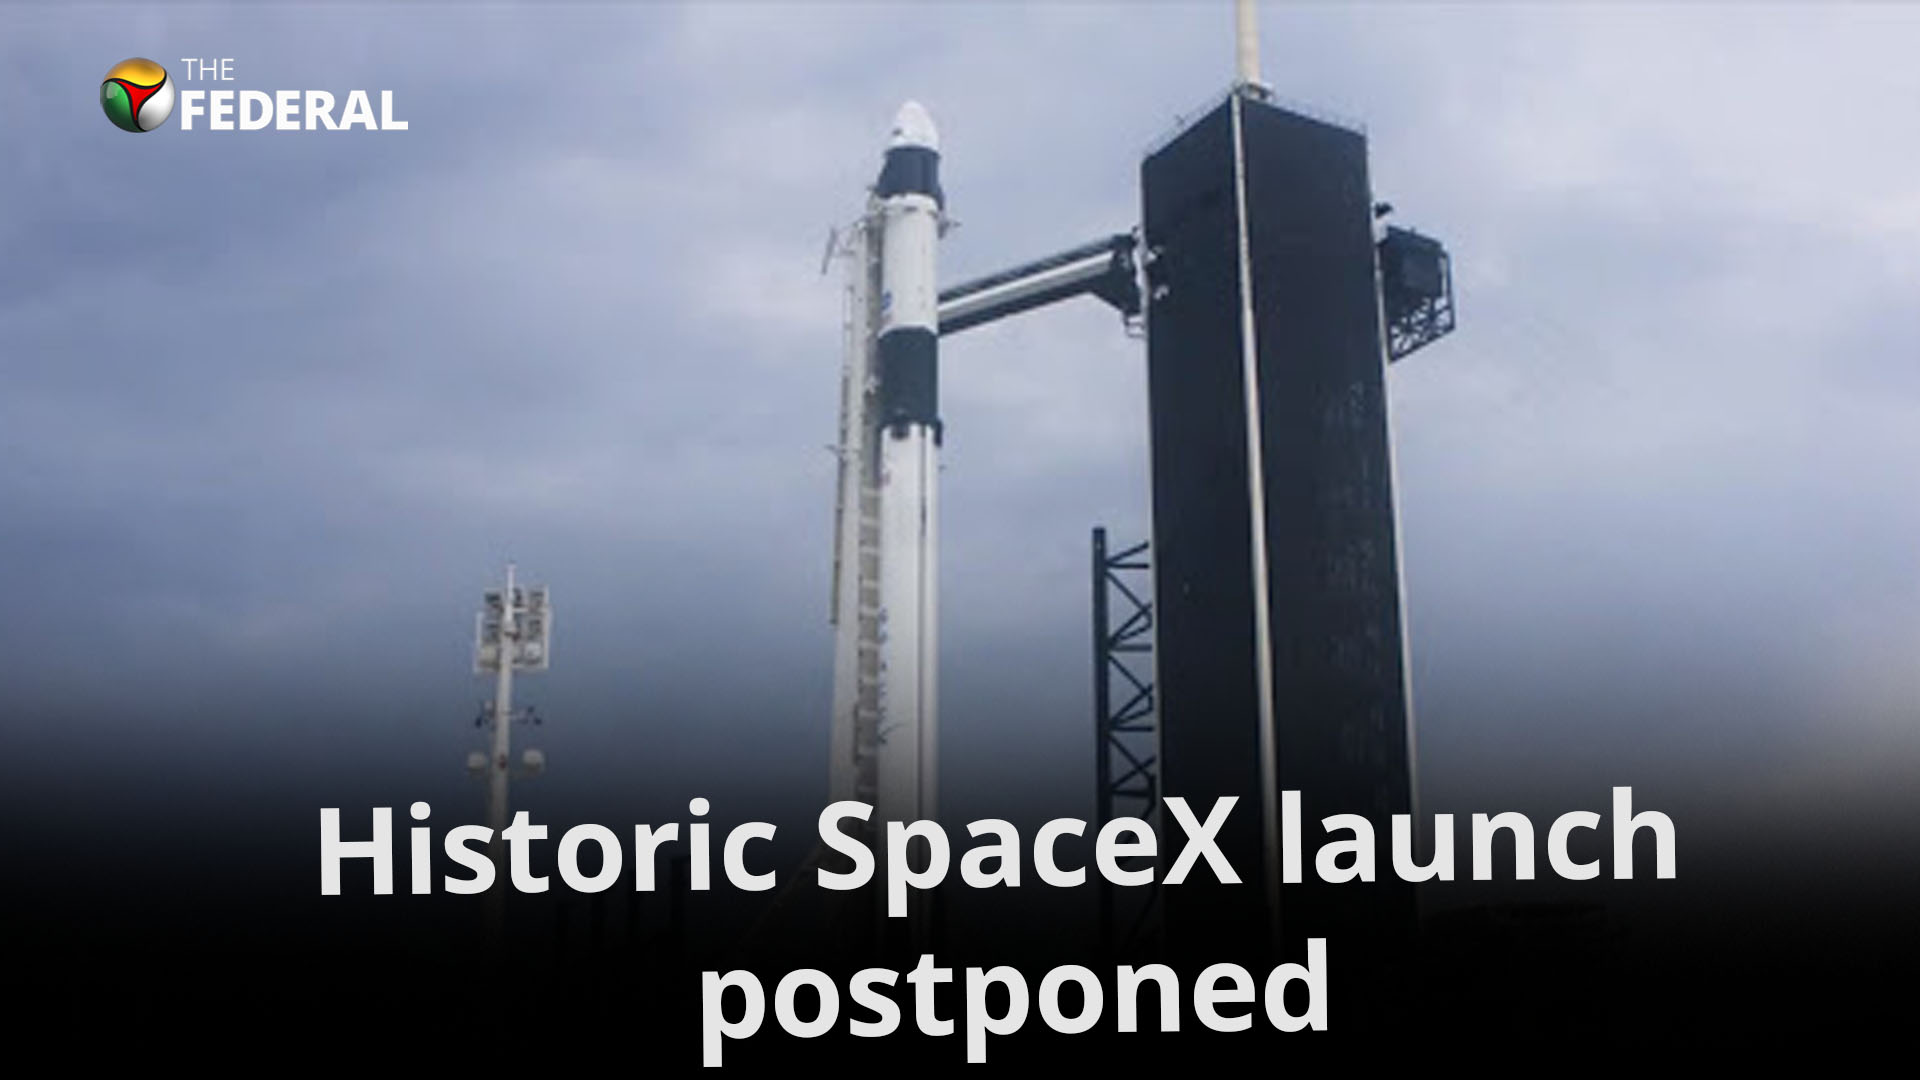 Weather plays truant, historic SpaceX launch postponed